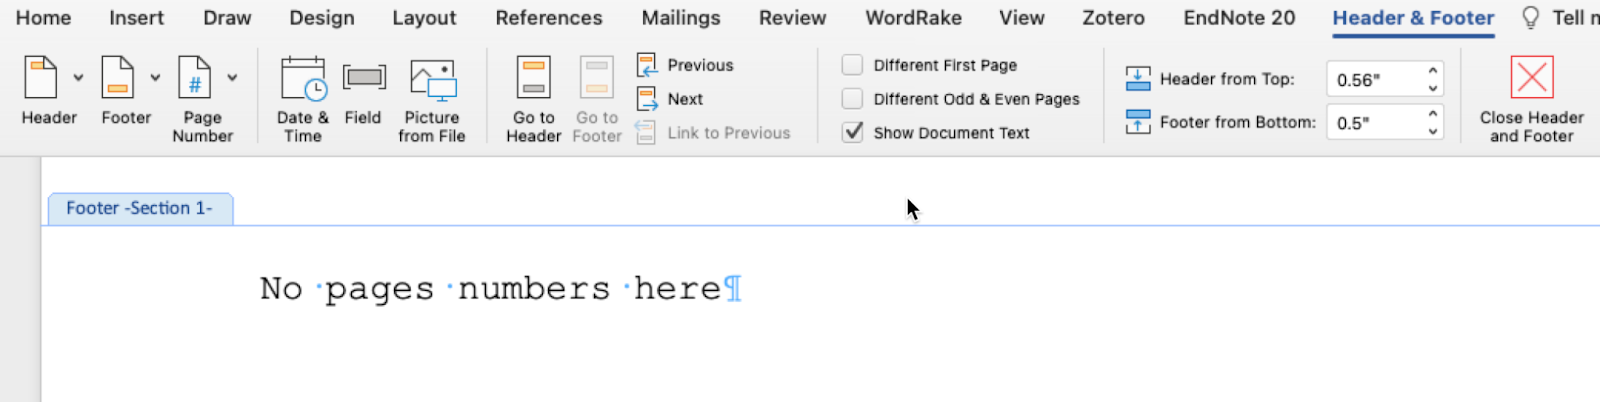 Word for Mac Header & Footer Tab, showing the tab options